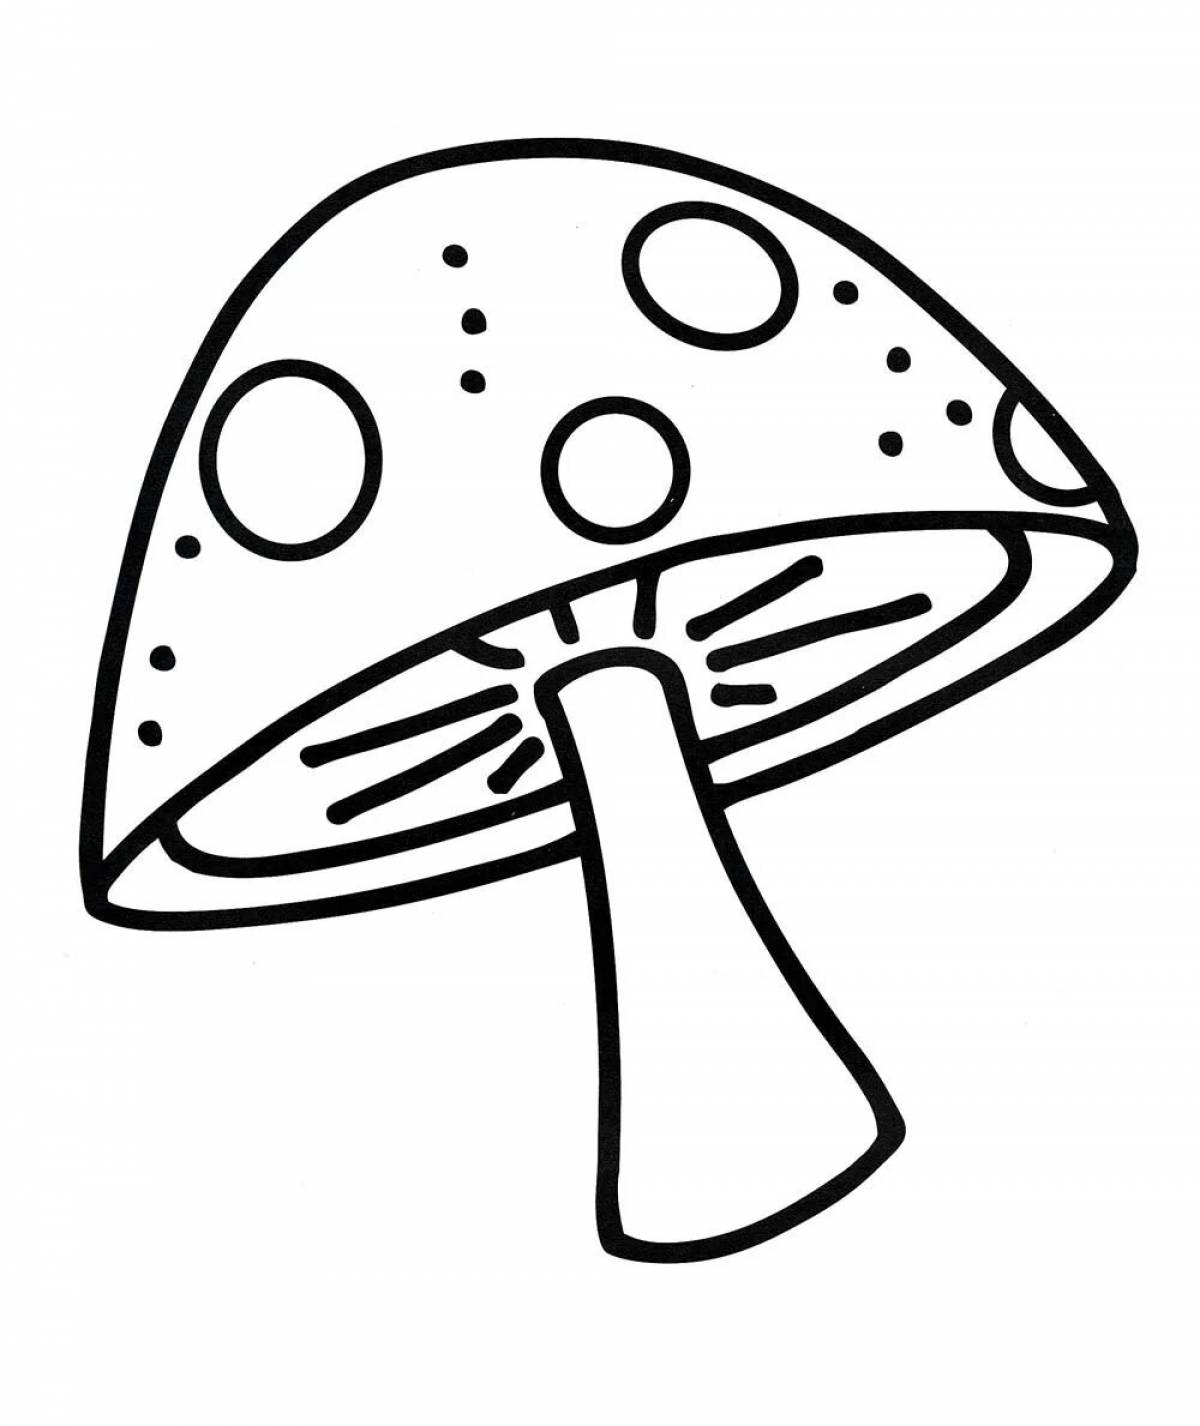 Fly agaric for babies #1